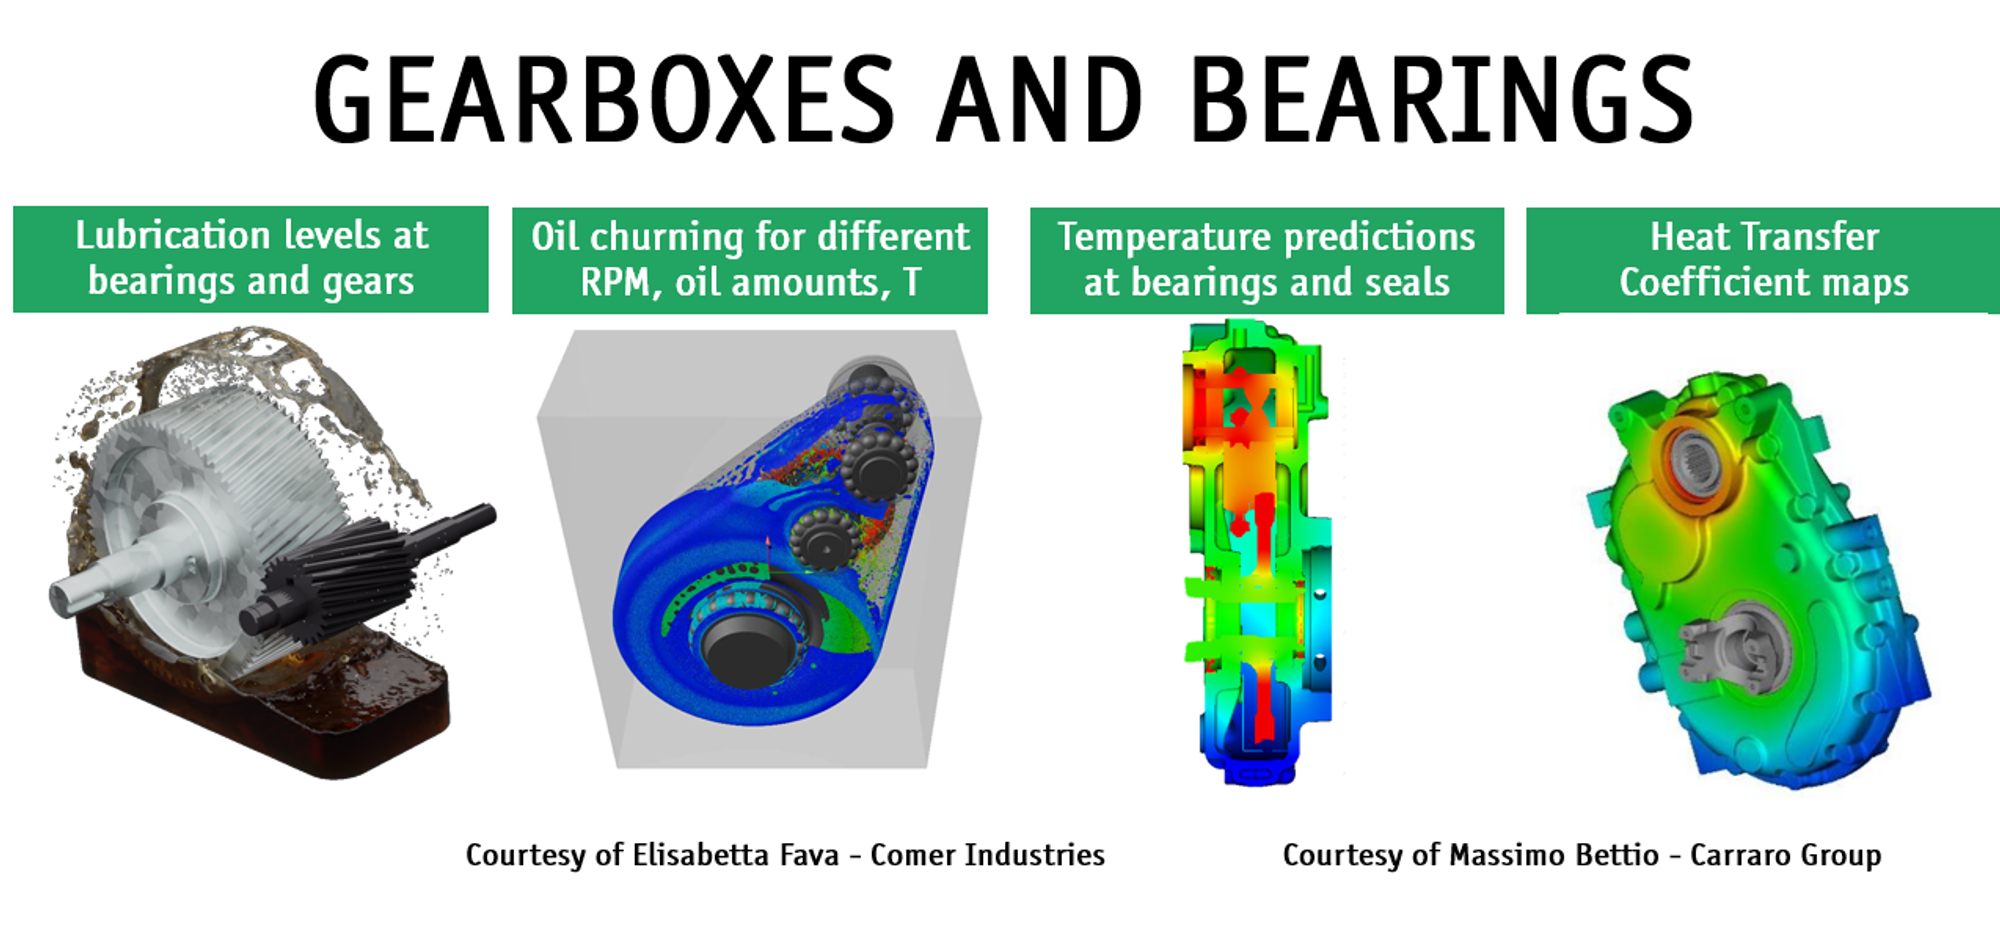 GEARBOXES AND BEARINGS